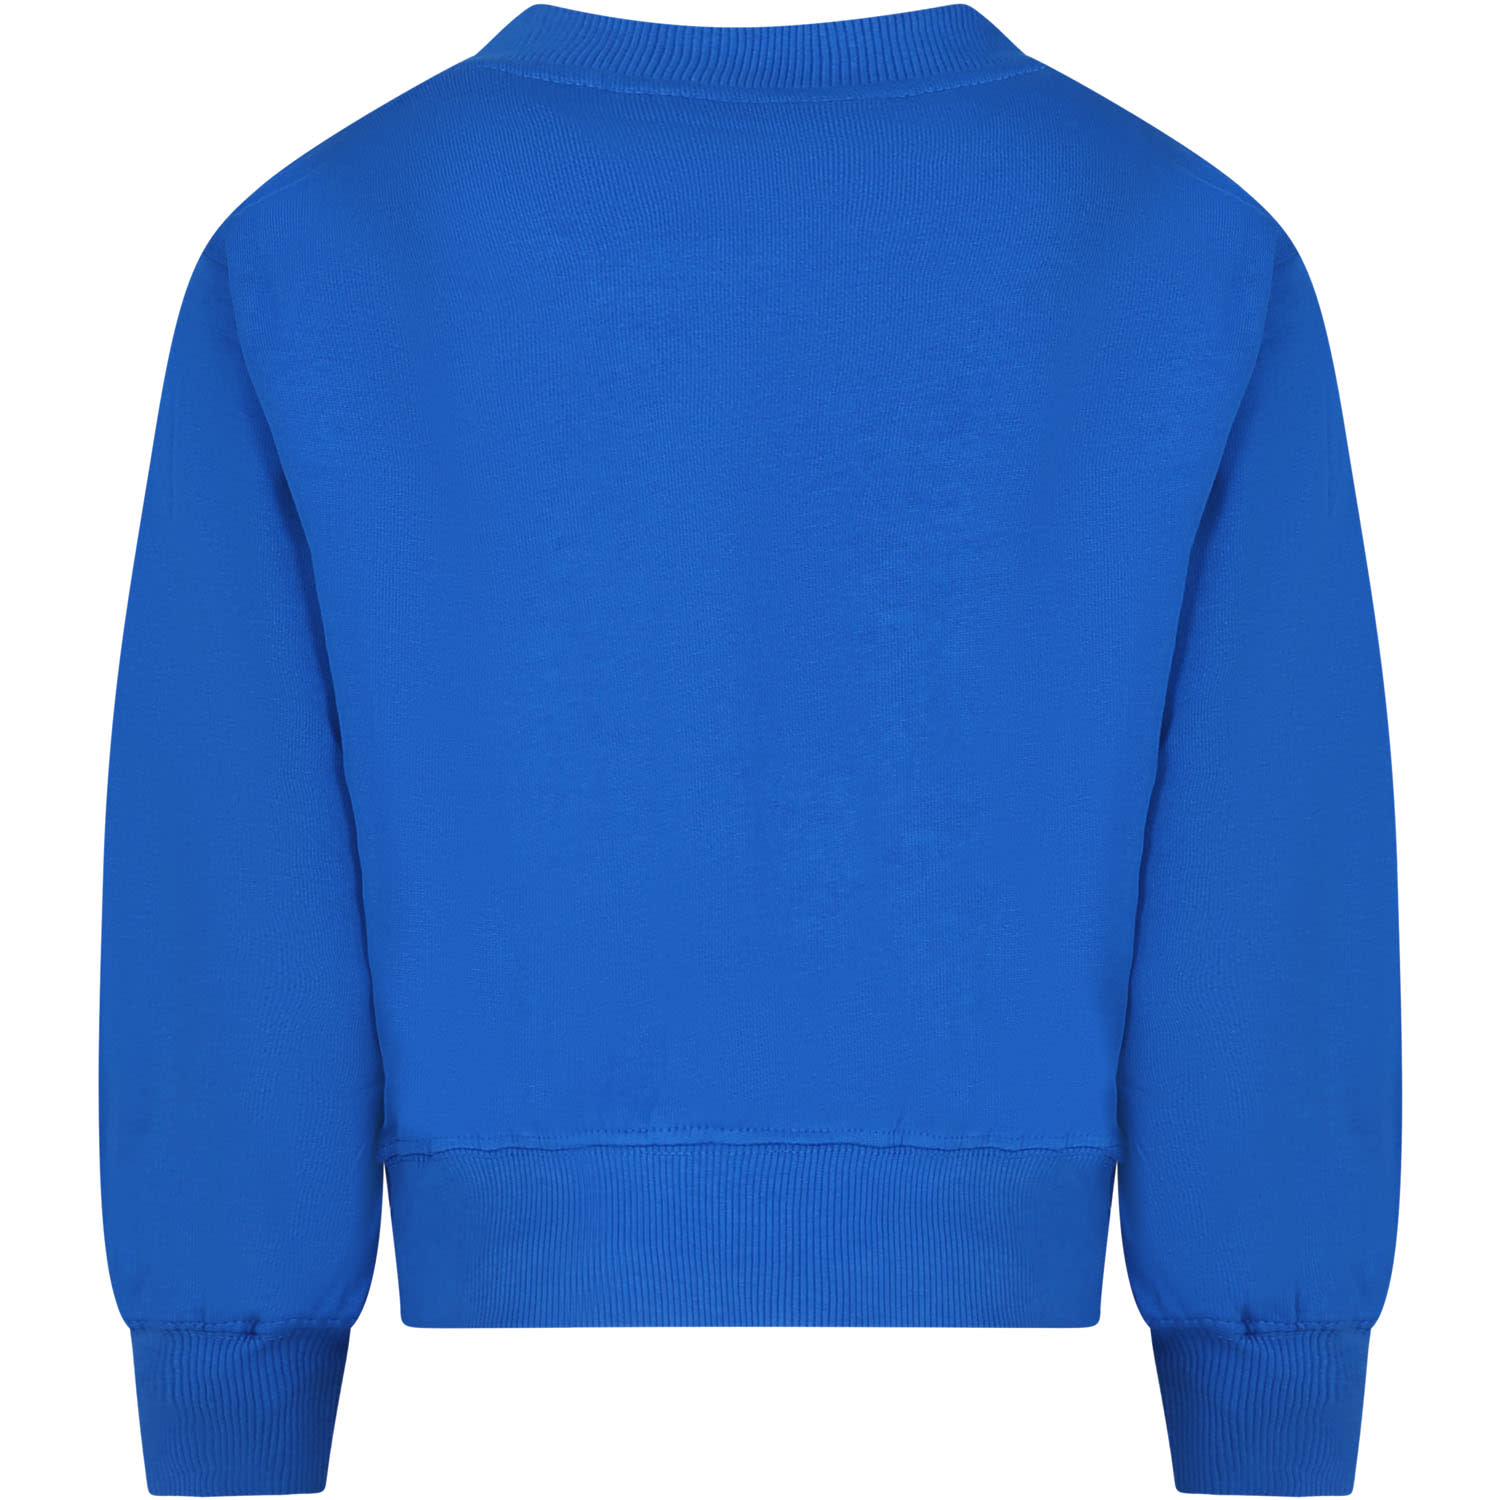 Shop Molo Blue Sweatshirt For Girl With Shell